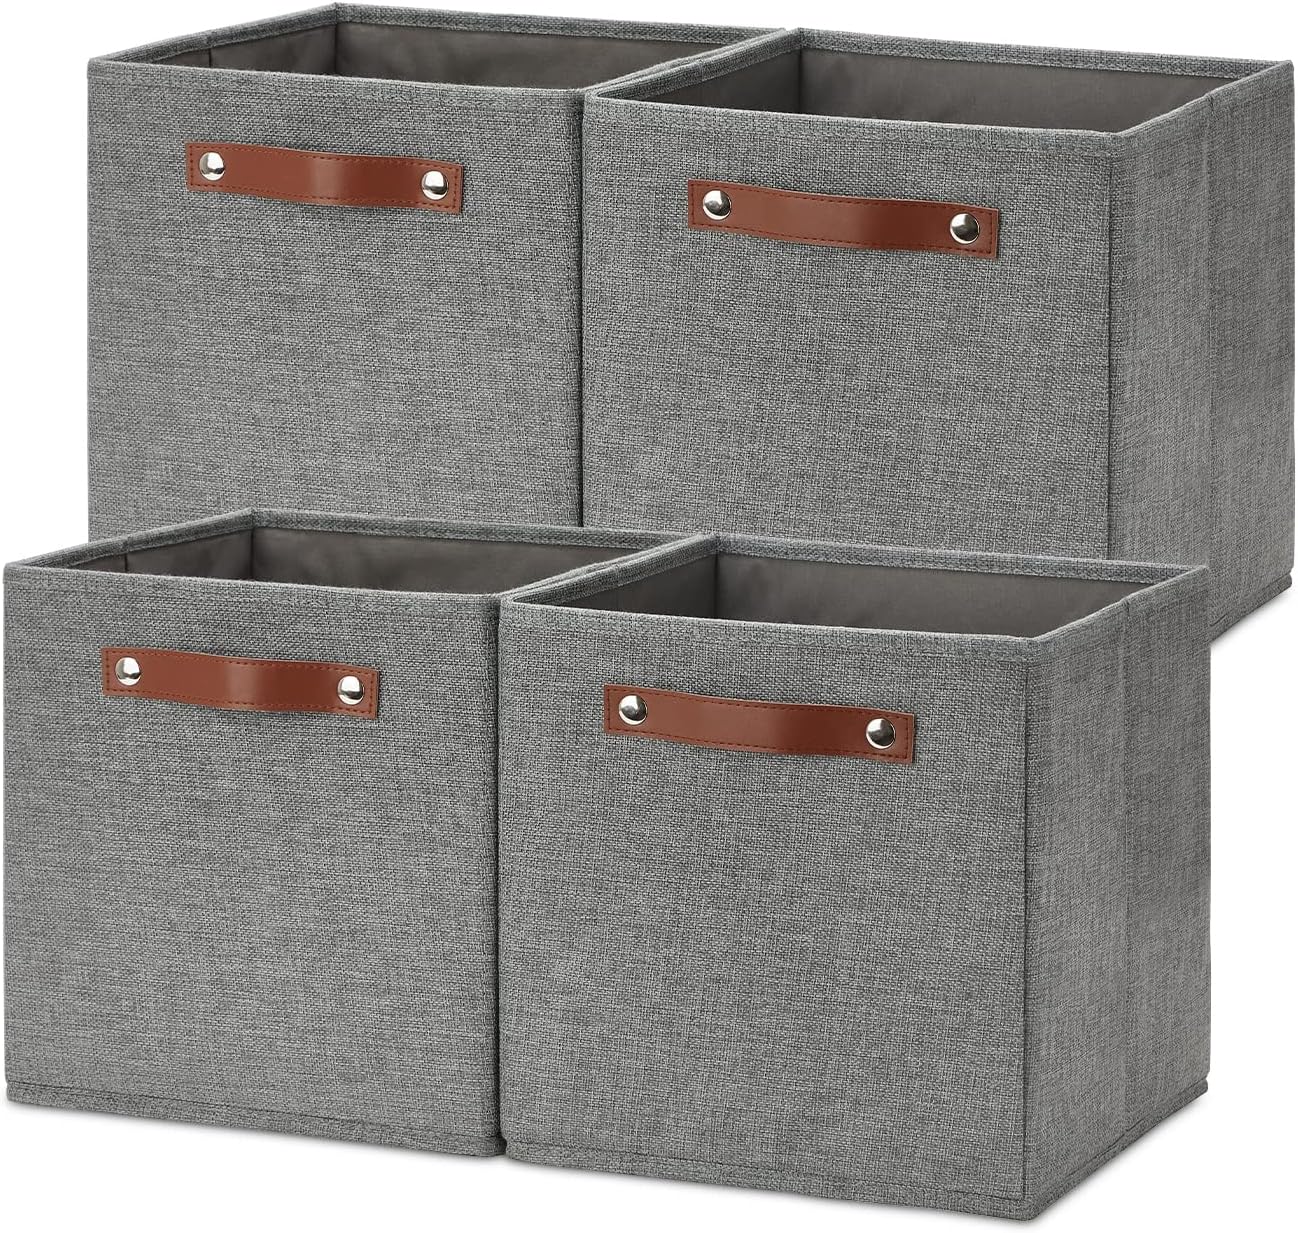 Temary 11 Inch Cube Storage Bins 4PCs Fabric Storage Cubes Storage Baskets Organizer with Handles, Foldable Baskets for Organizing Clothes, Toys, Towels (Grey, 11x11x11)